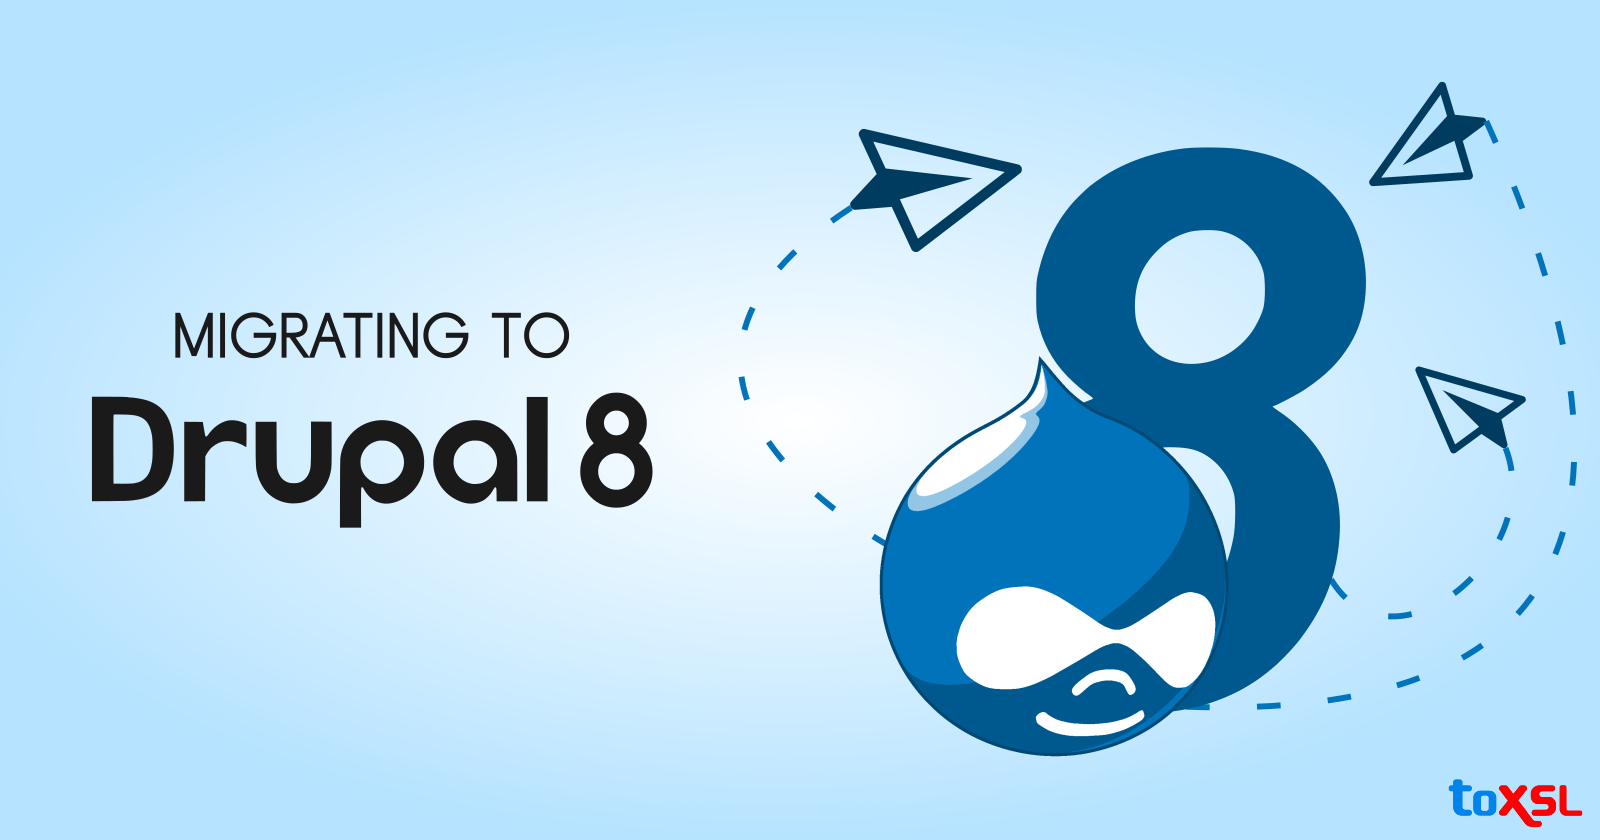 All You Need to Know for a Hassle Free Migration to Drupal 8